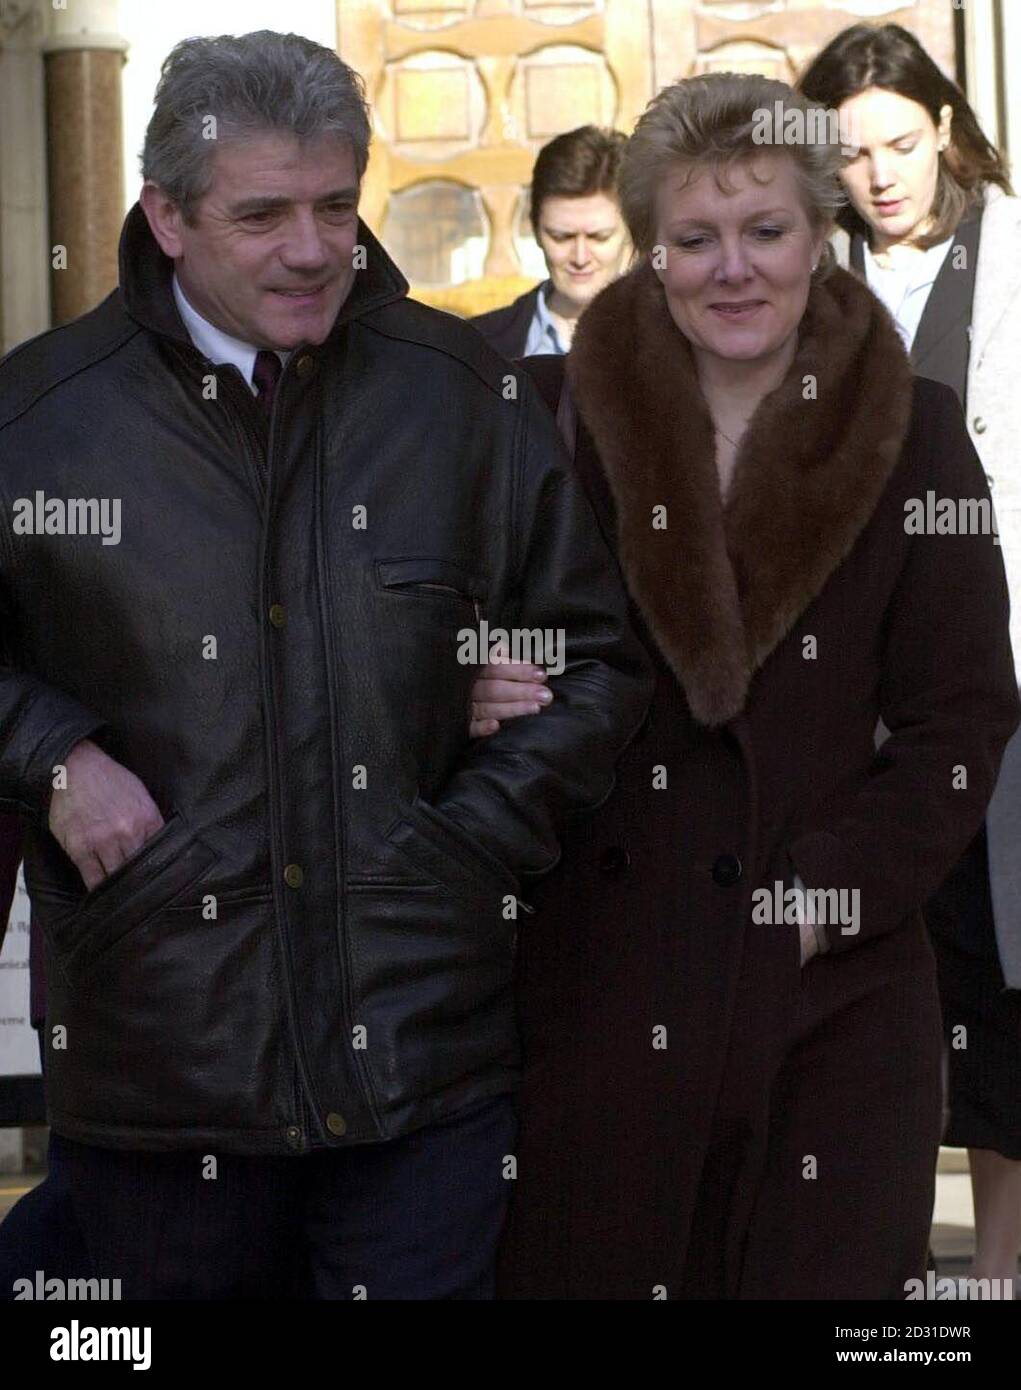 Former England coach Kevin Keegan and his wife Jean leave the High Court in  London after hearing lawyers for News Group Newspapers offer "sincere  apologies" over the article in the News of